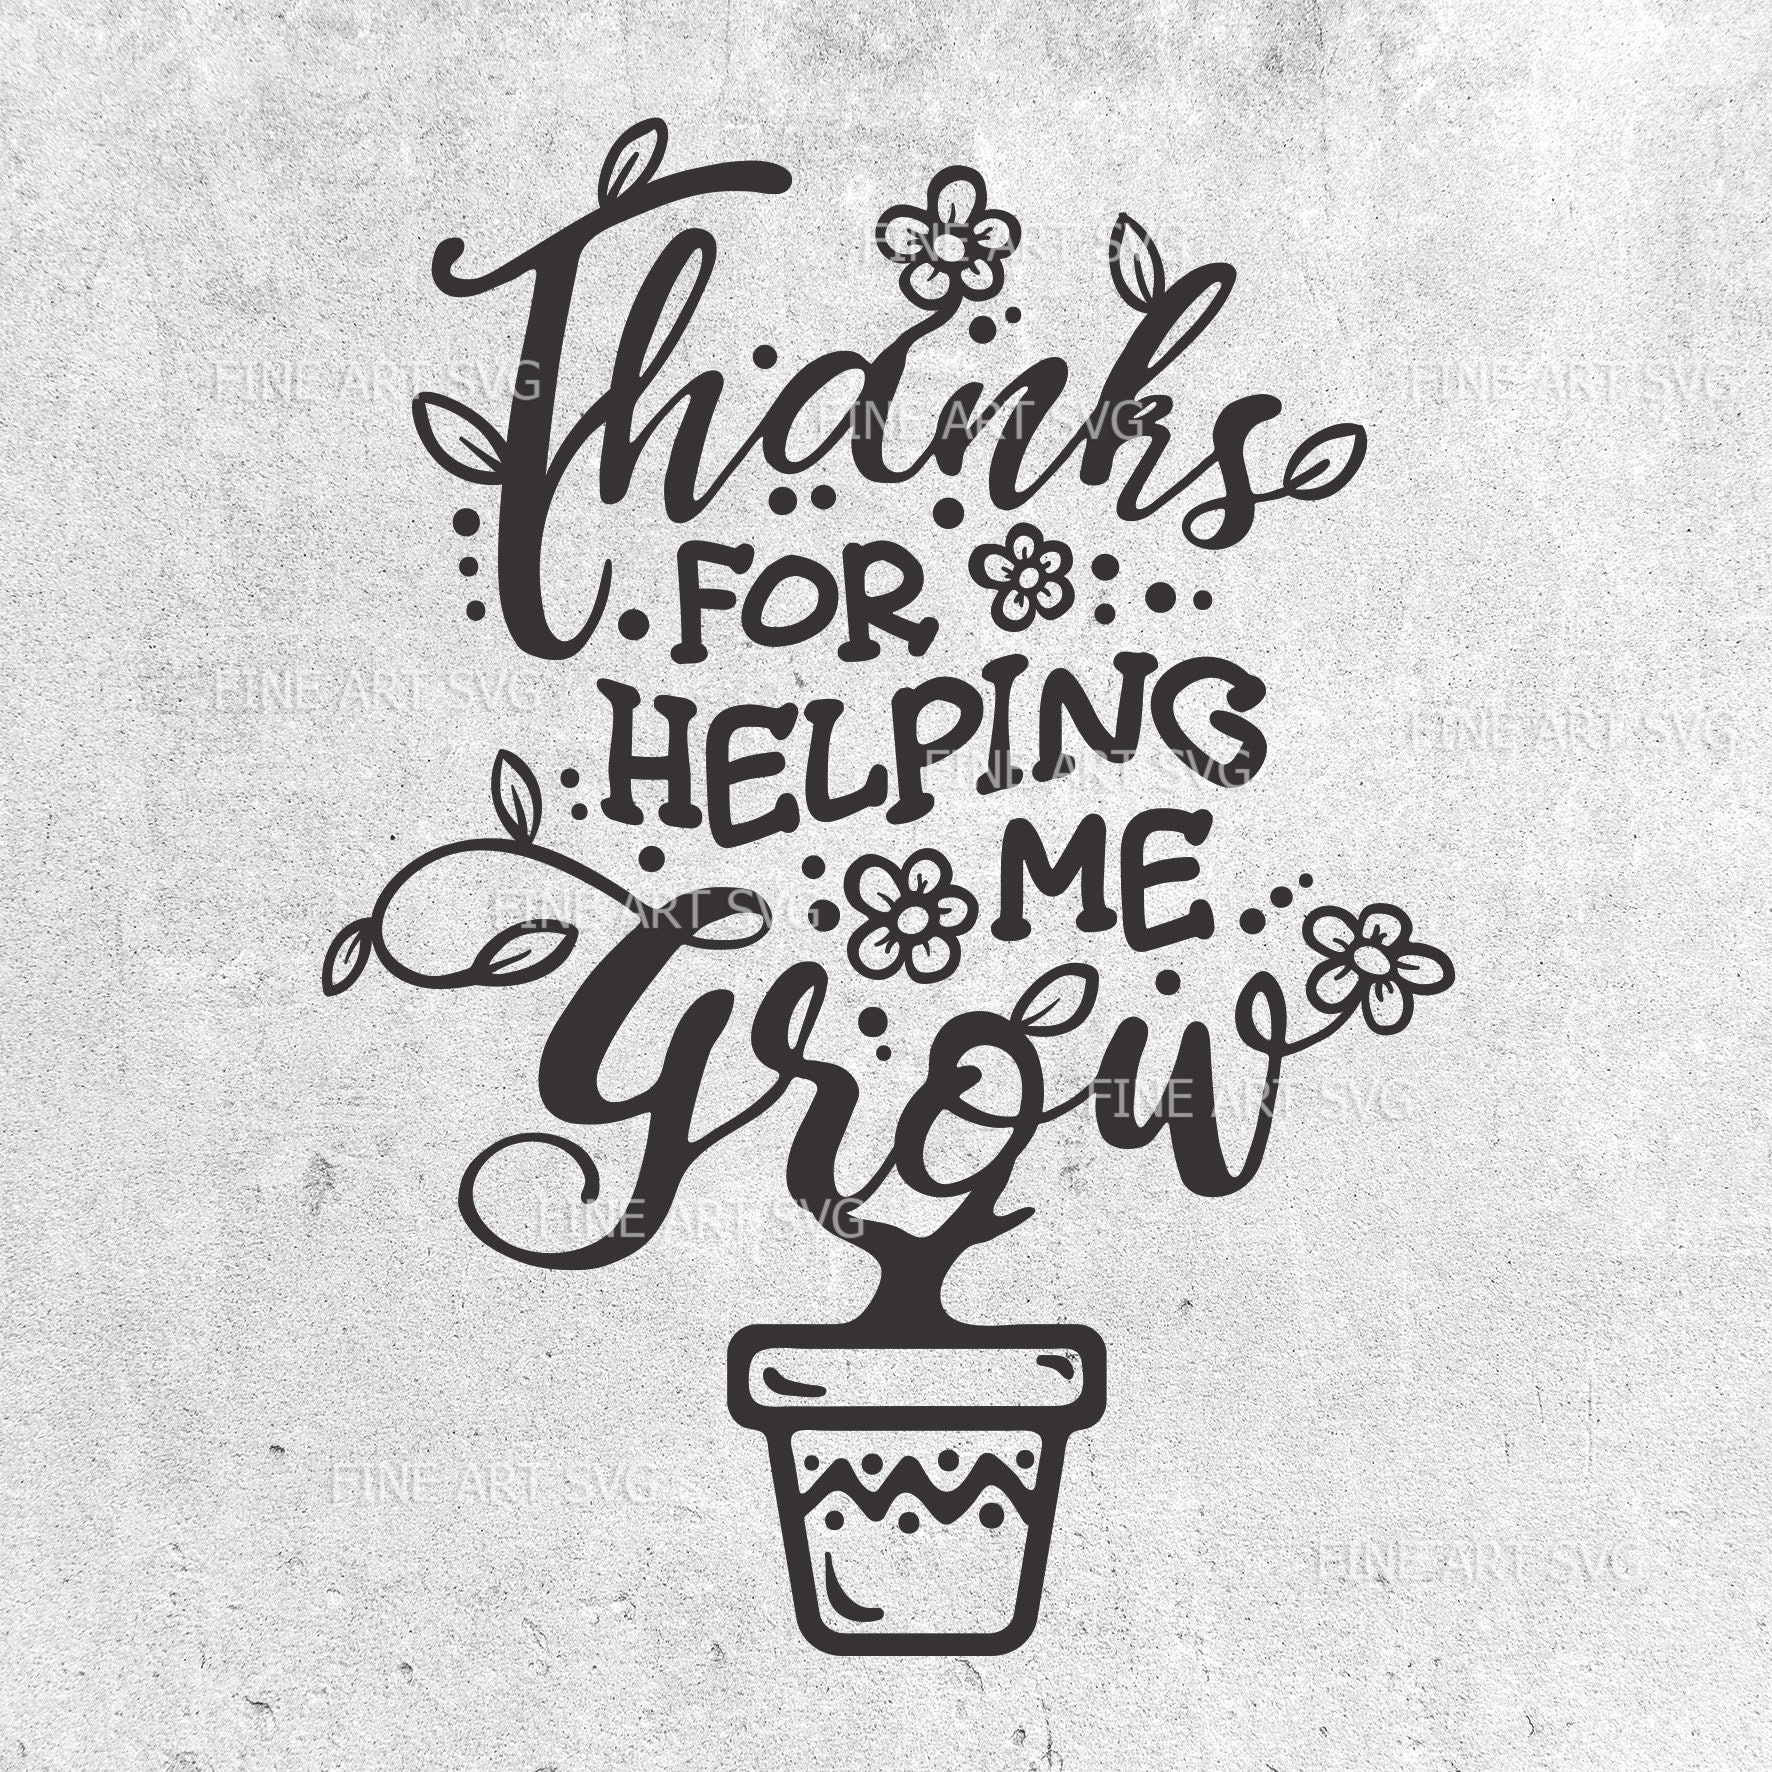 thank-you-for-helping-me-grow-printable-black-and-white